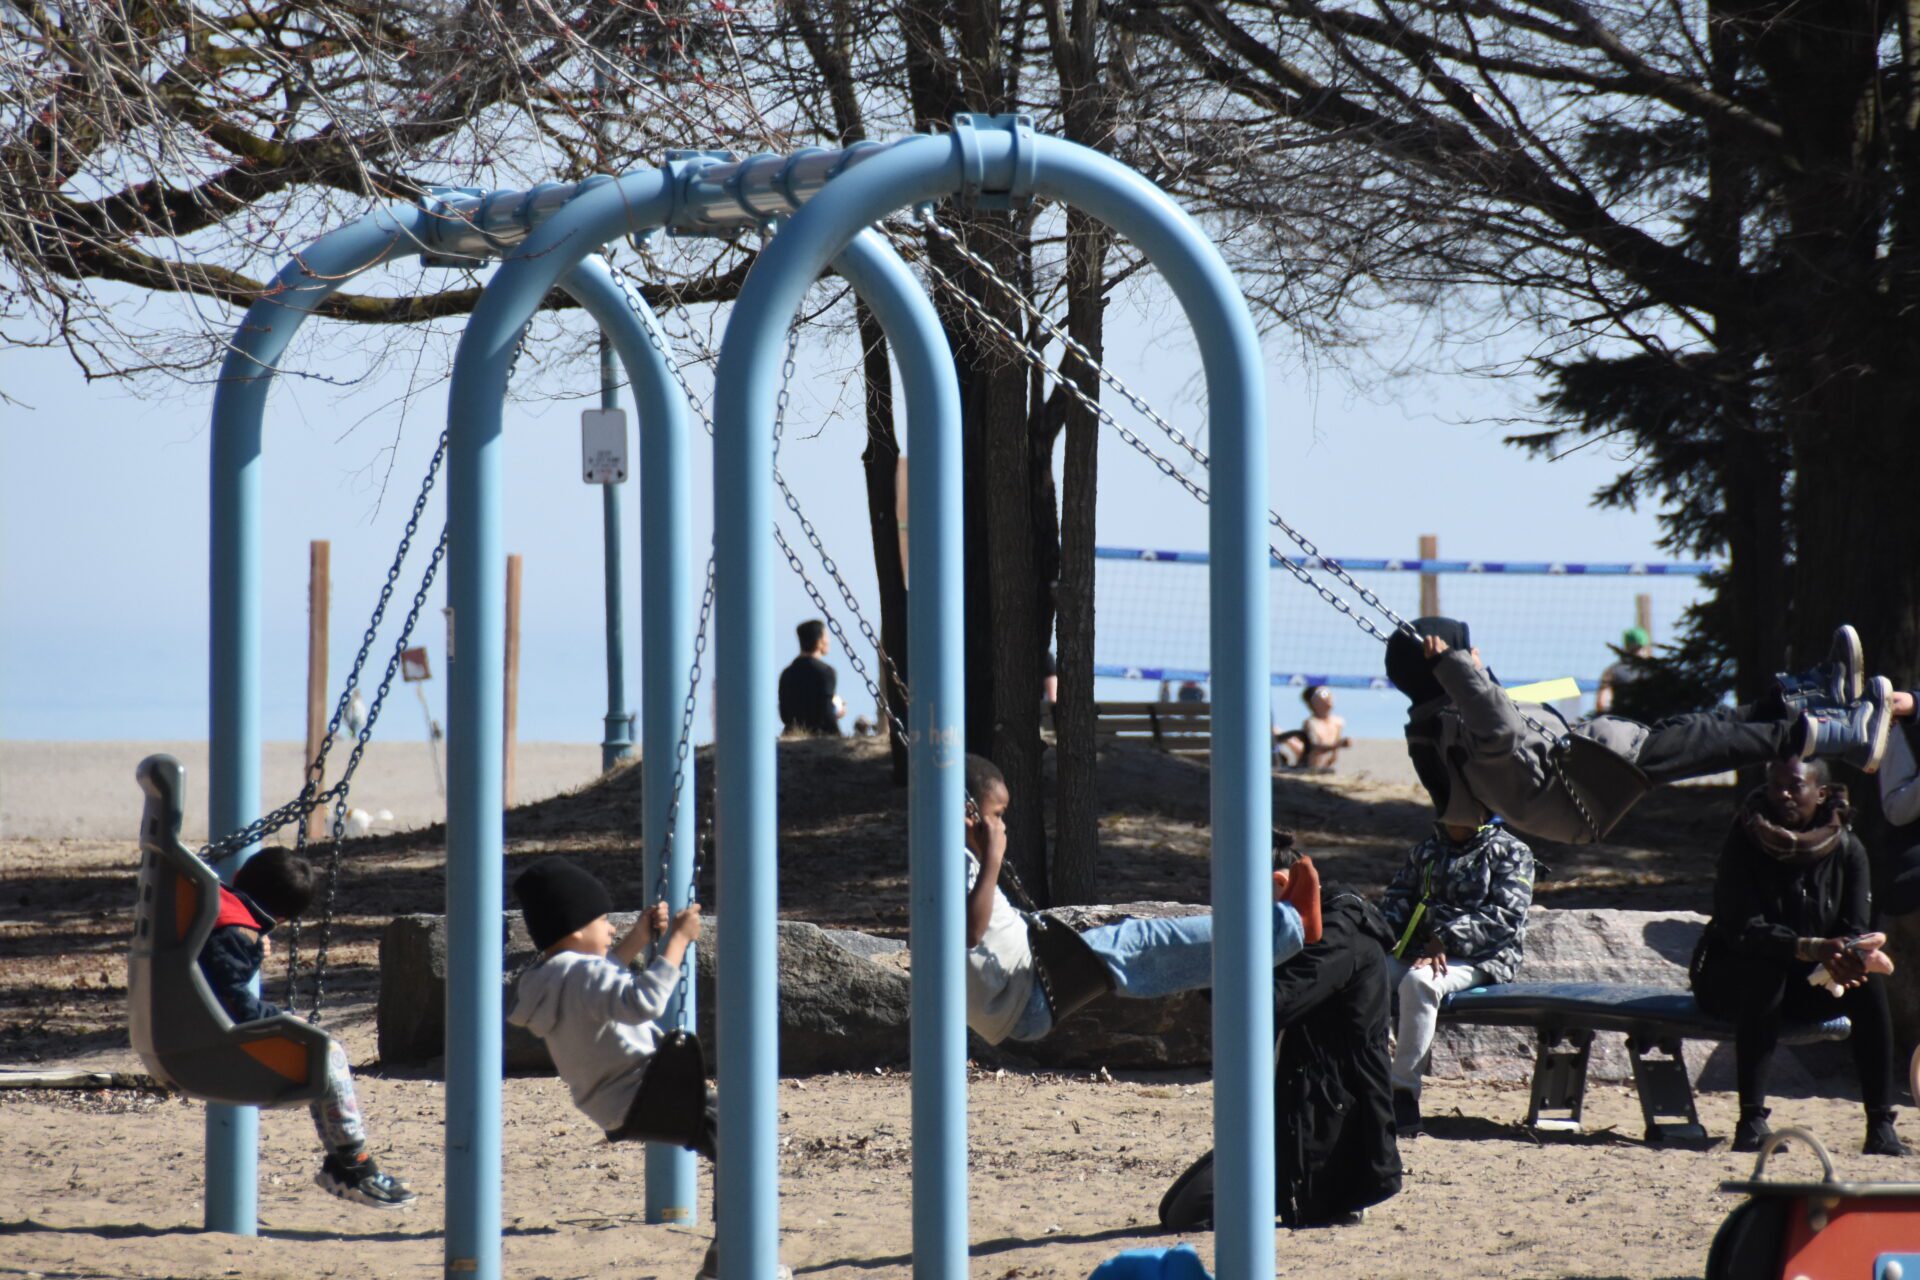 4 kids on the swings at a playground with the beach in the background